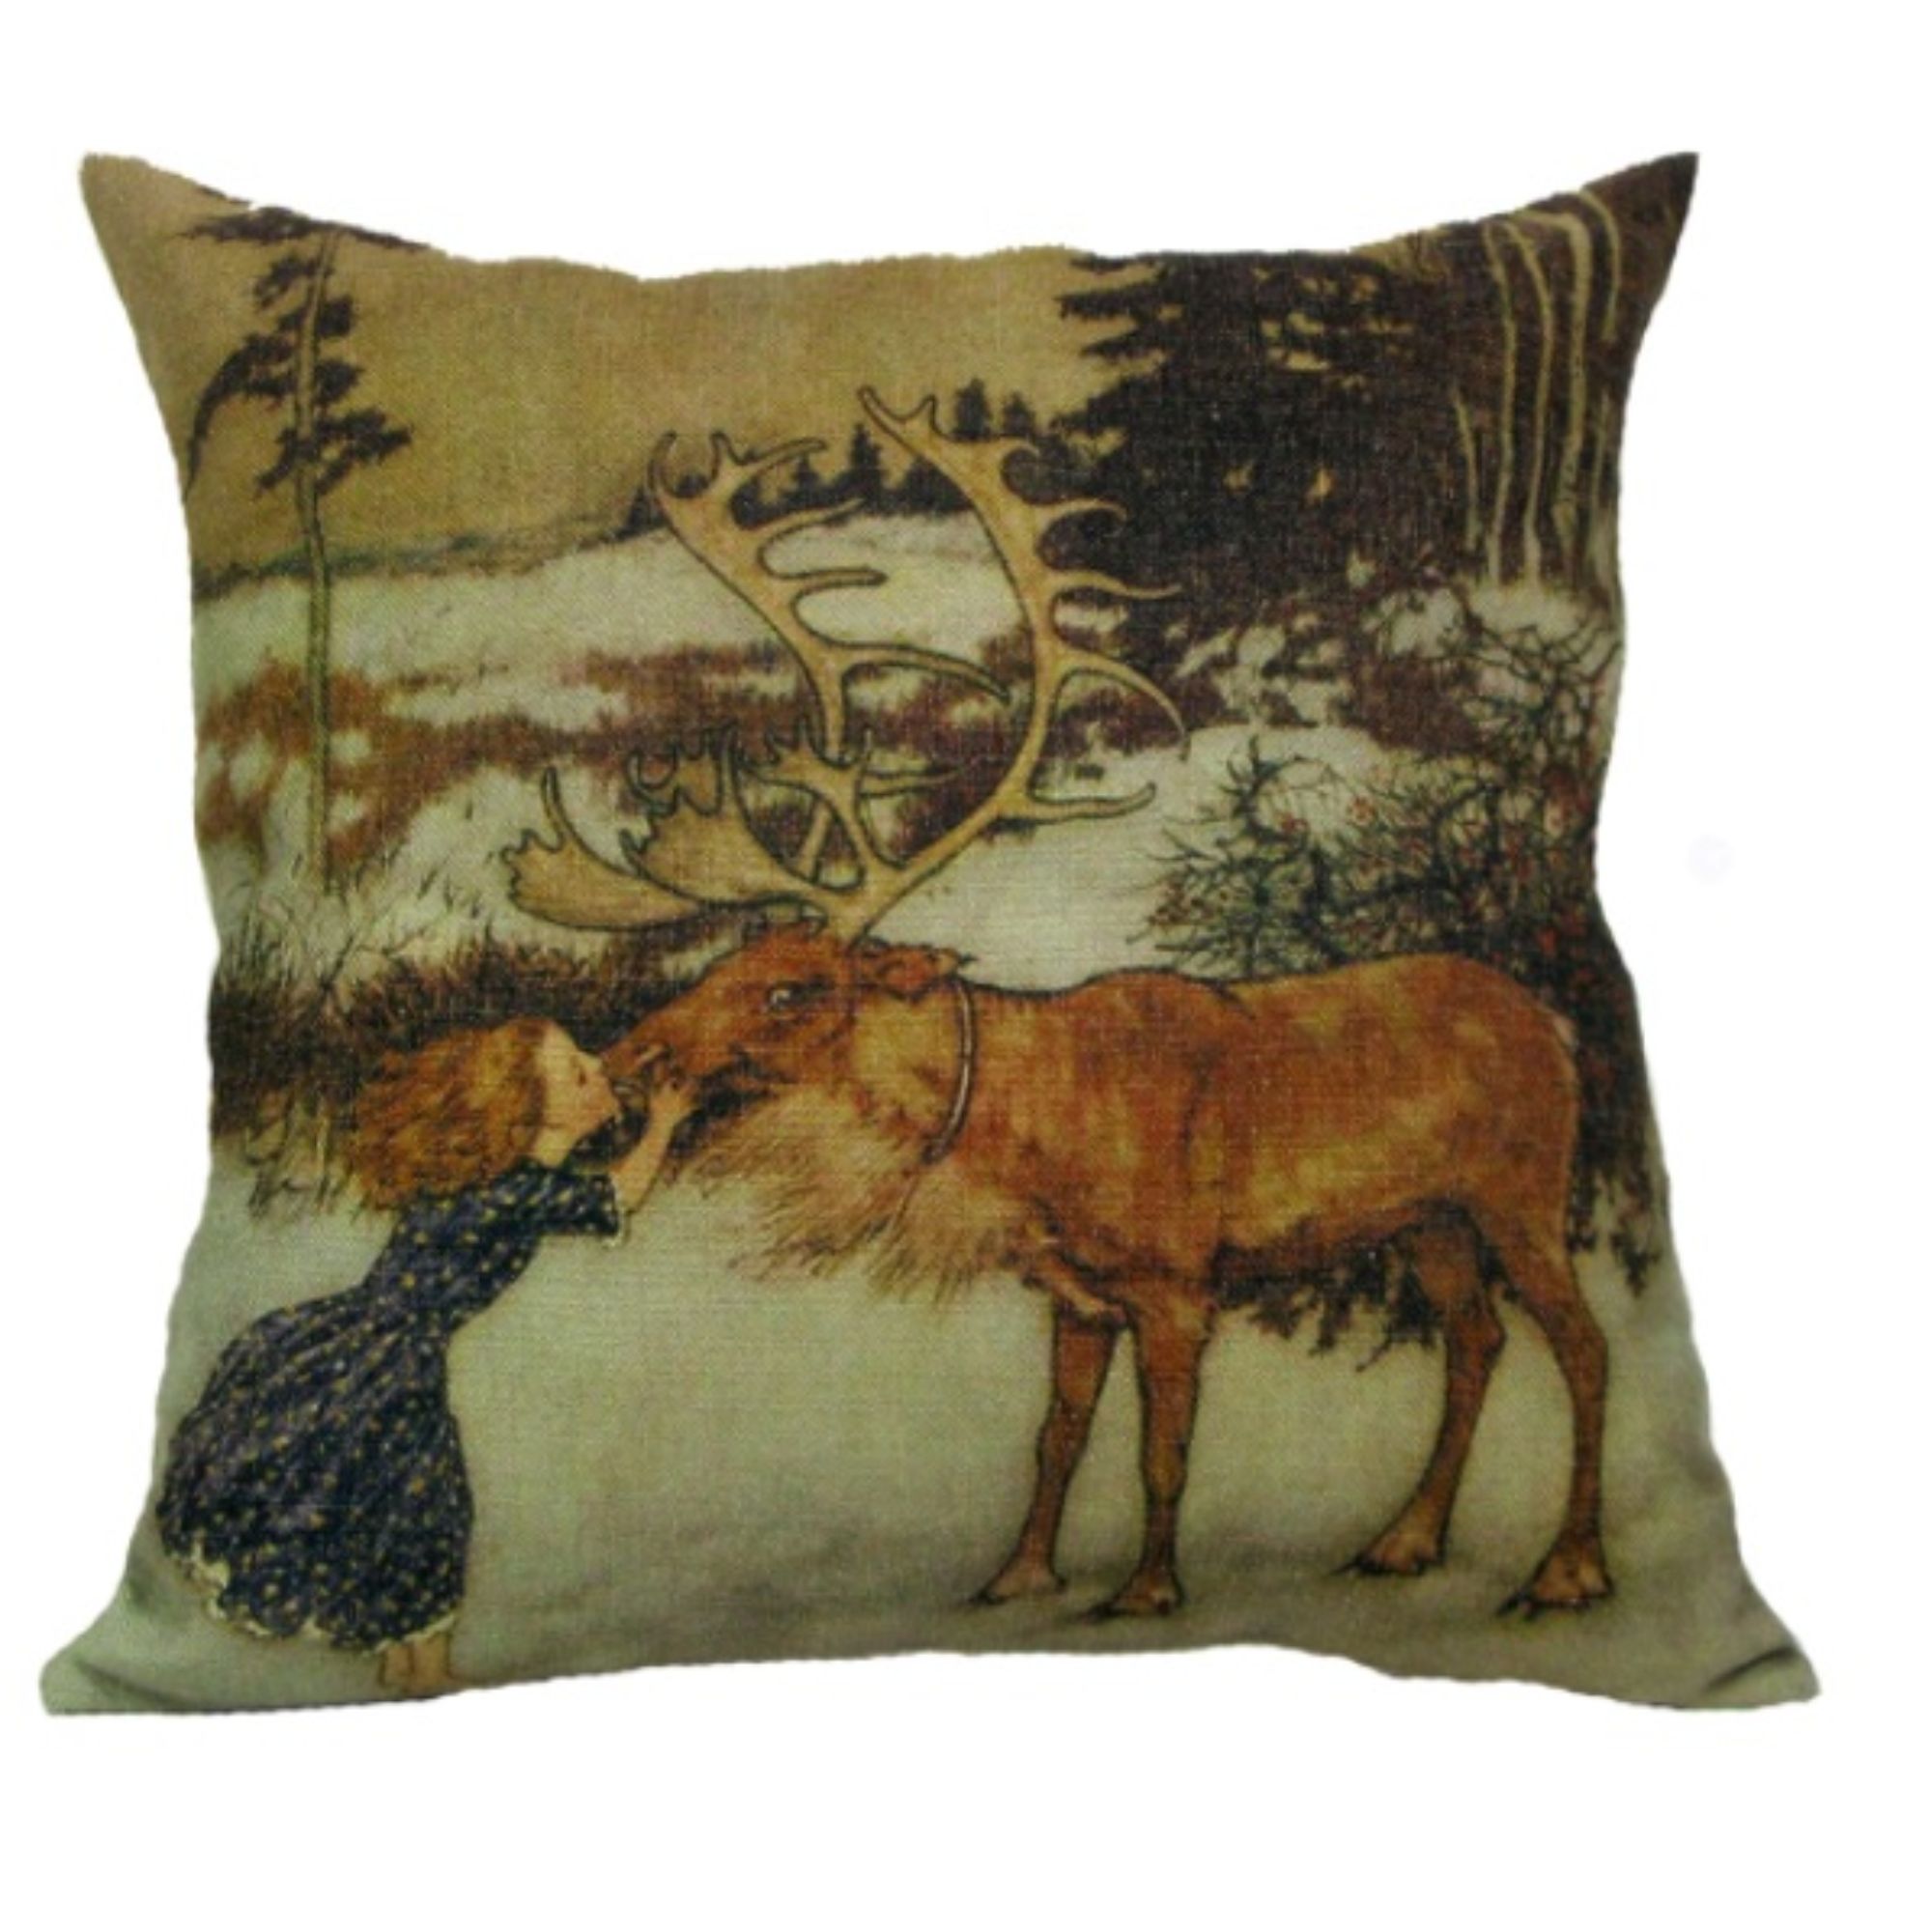 Golden Hill Studio 18" Brown Square Gerda and Reindeer Christmas Throw Pillow Cover